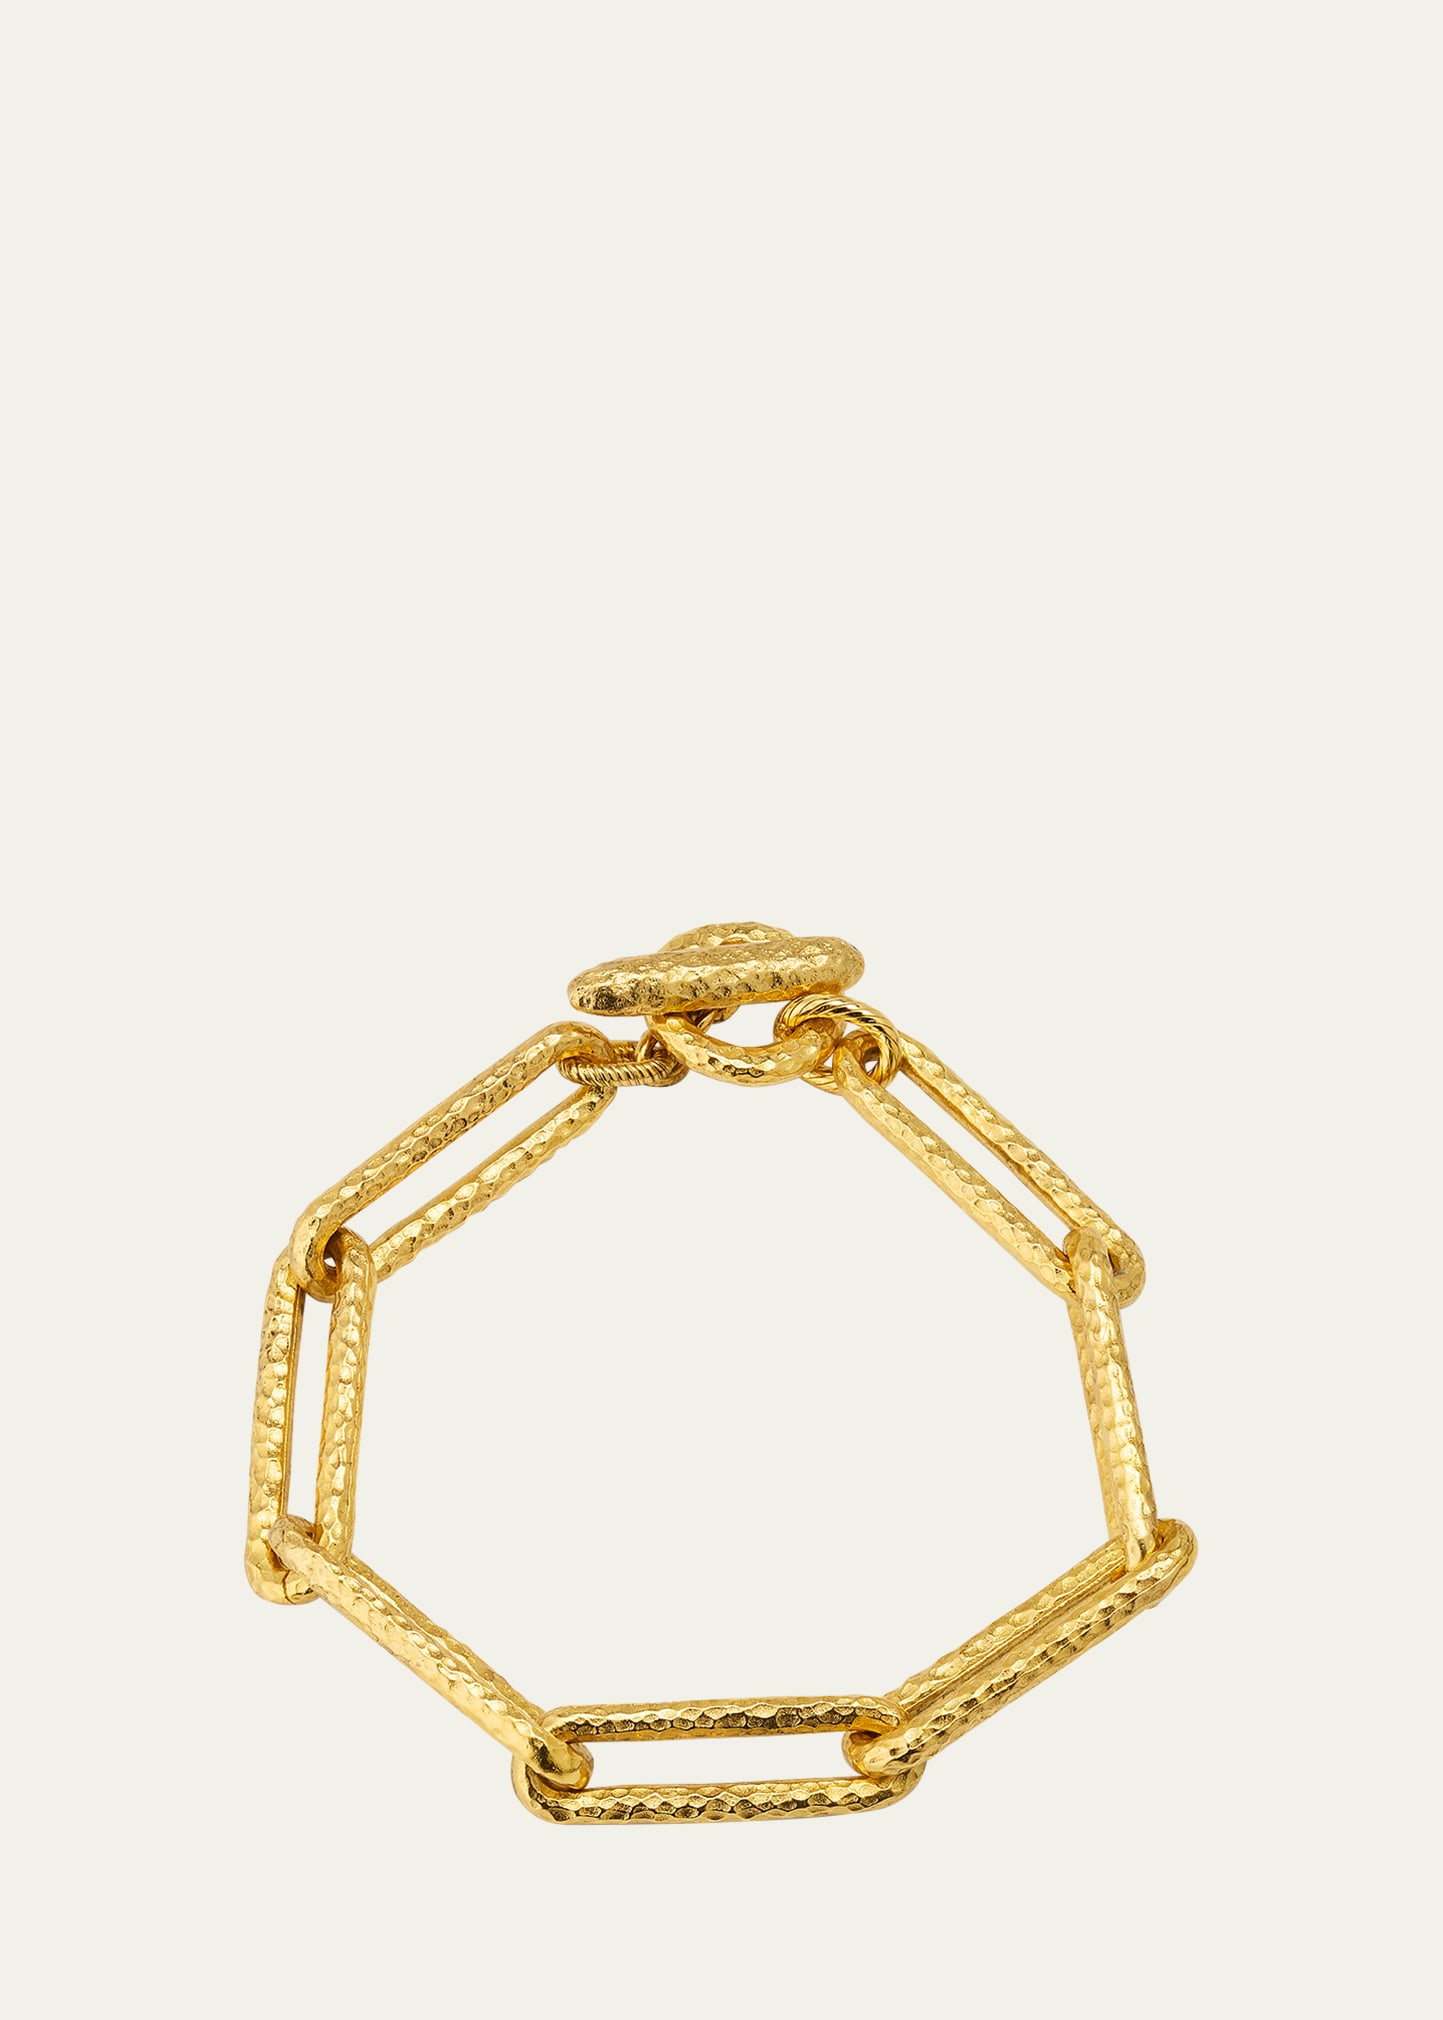 24K Hammered Yellow Gold Cable Chain Bracelet